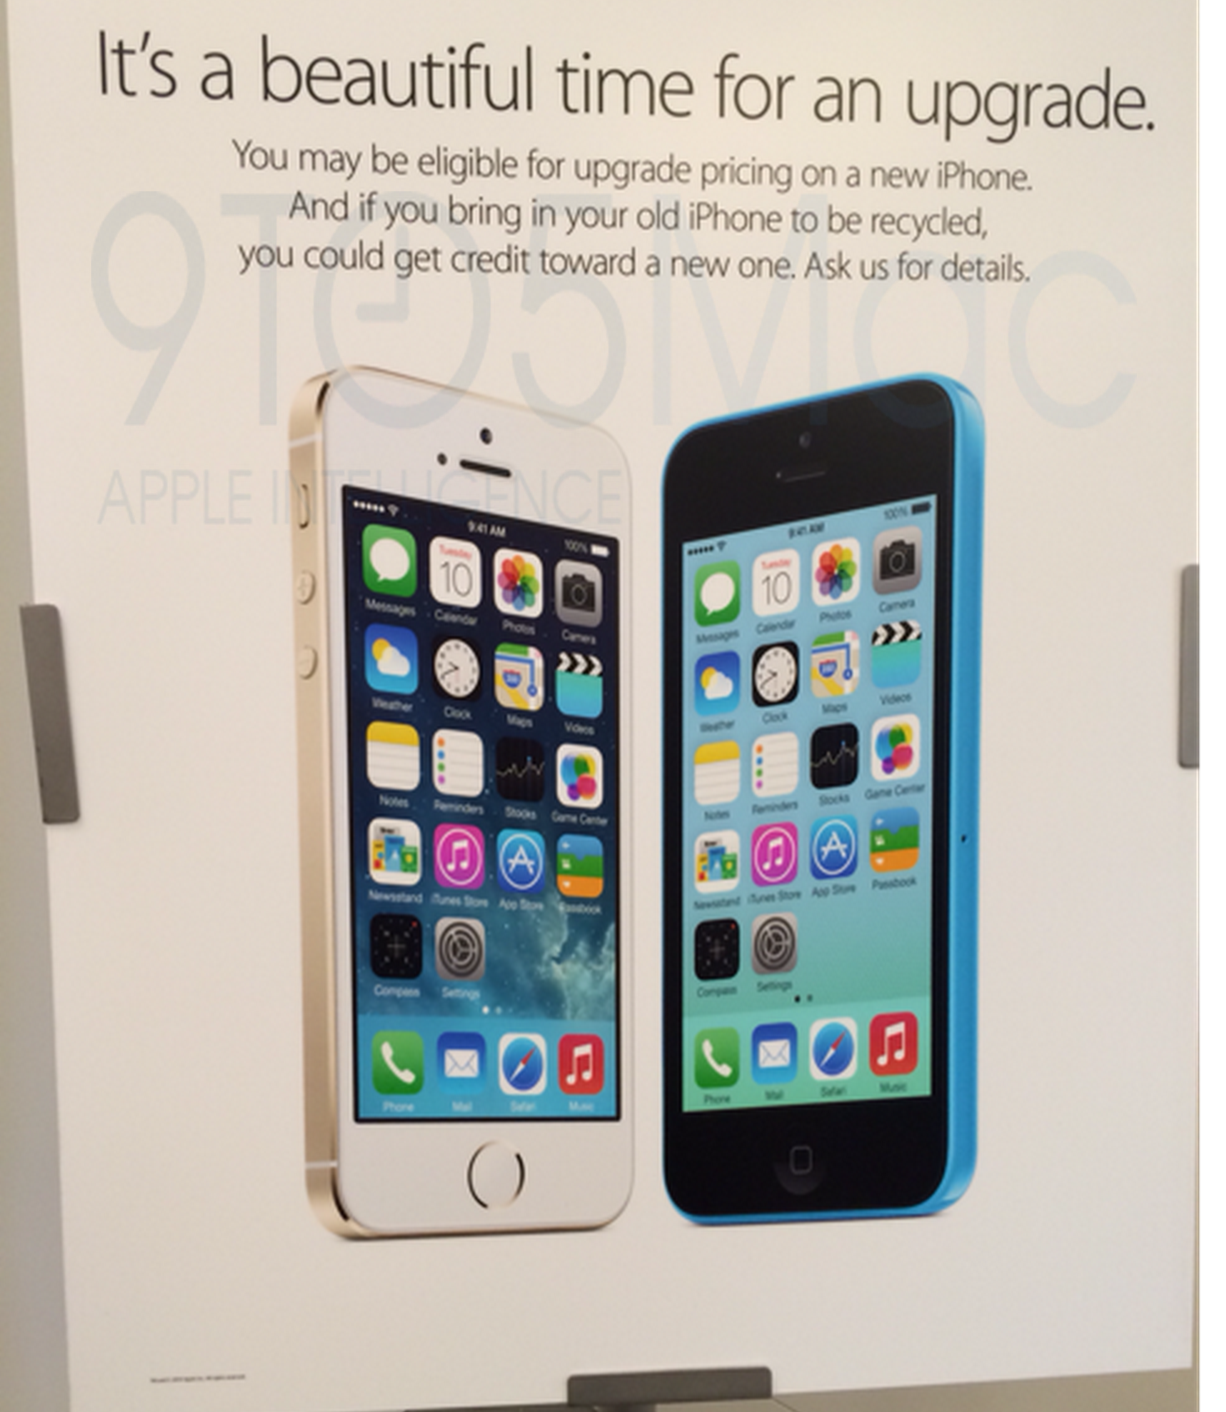 iPhone-trade-in-event-01